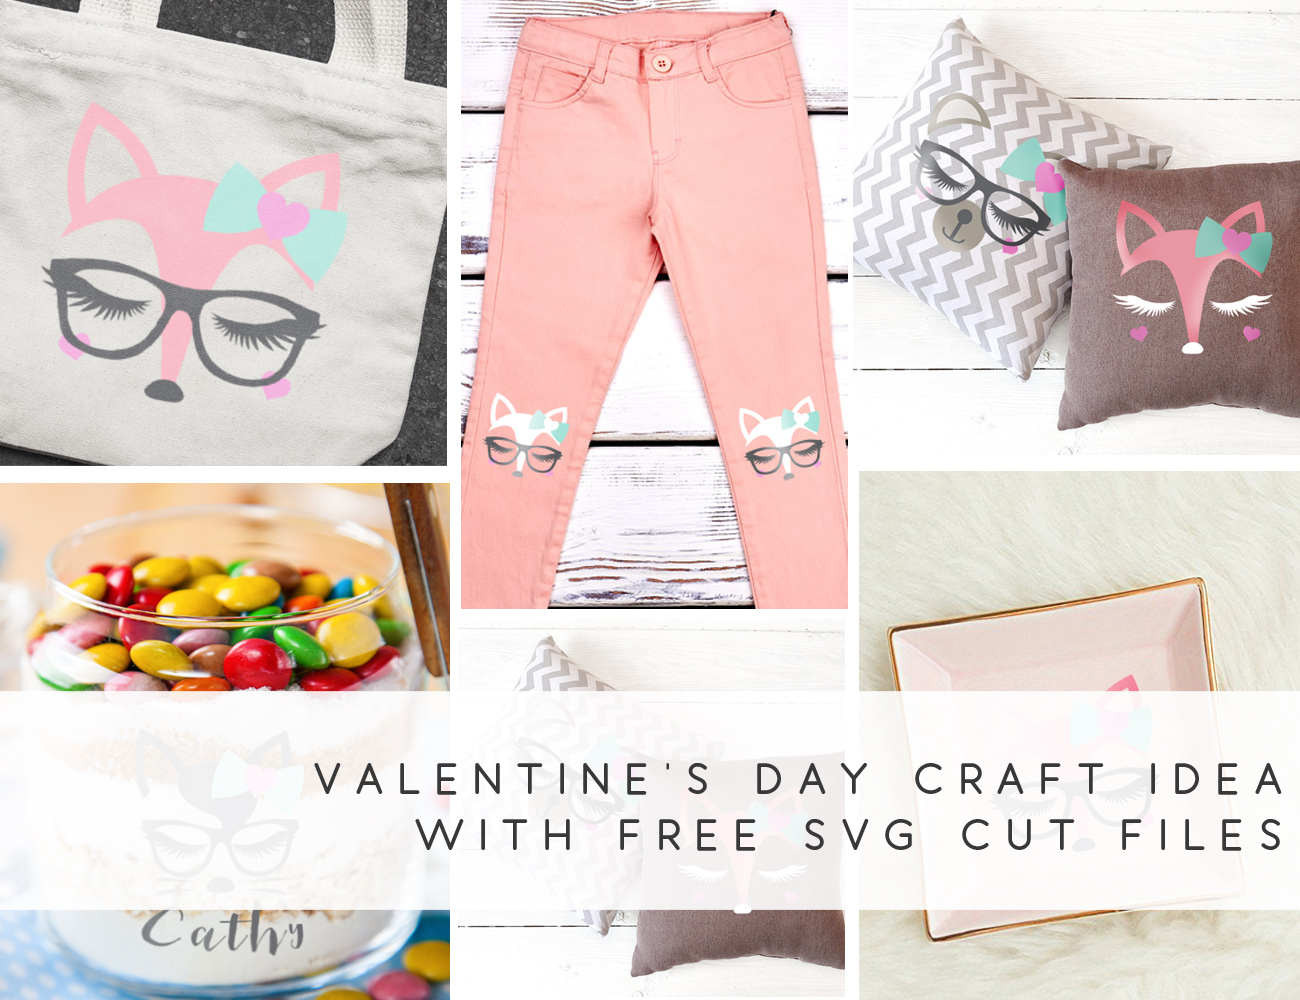 Free Cut File Download Included: 5 Valentine’s Craft Ideas for Cricut & Silhouette Users